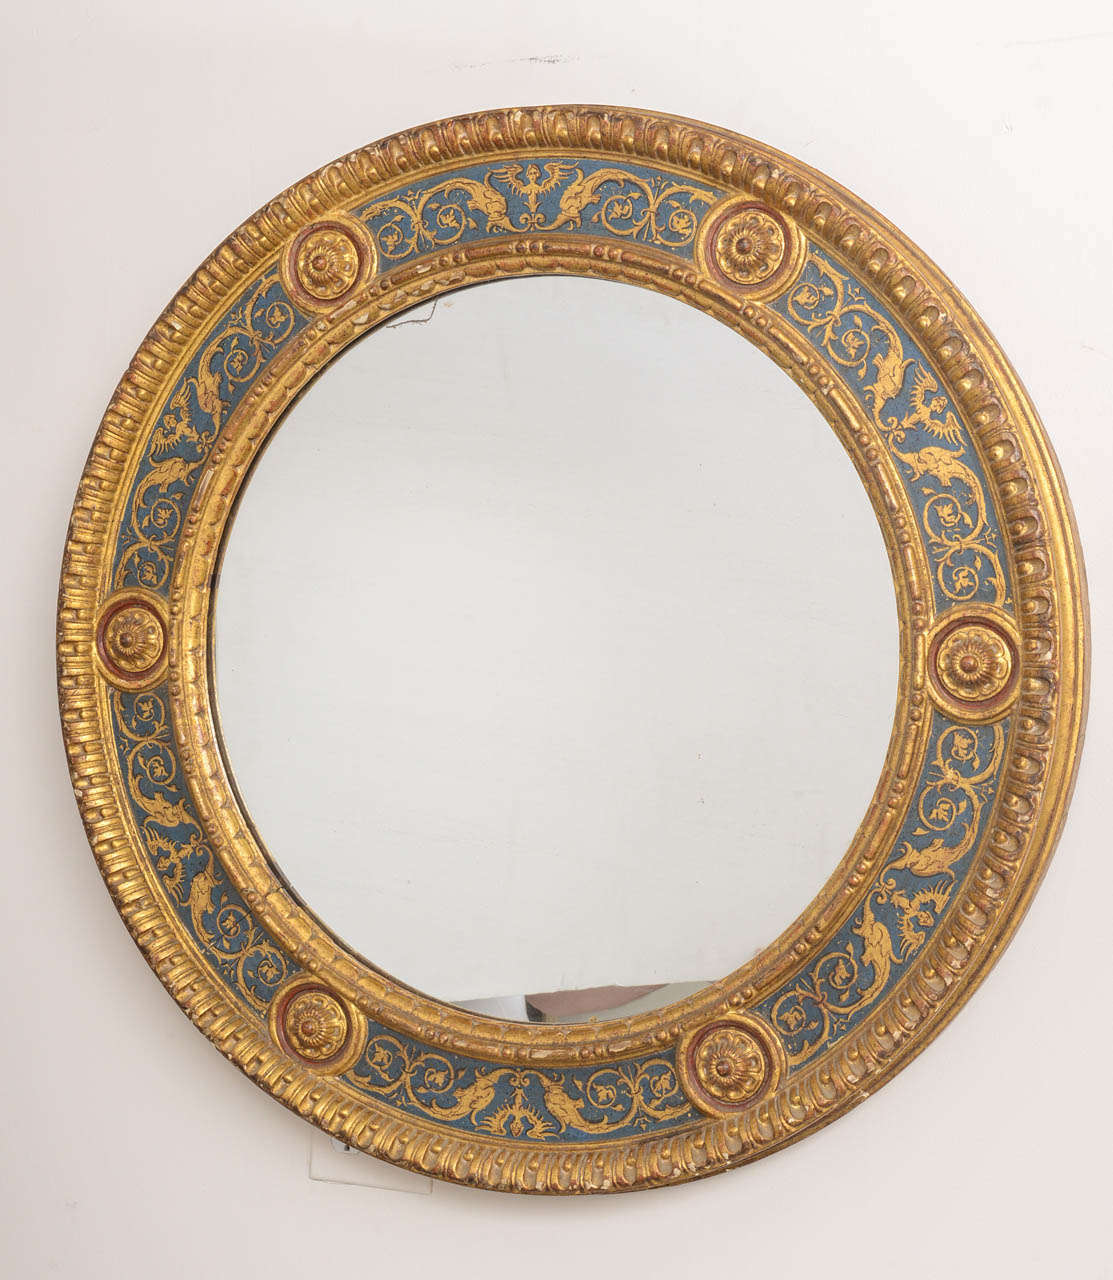 Exquisite Florentine mirror, hand-painted in blues and gold. Beautifully carved, gesso and gilt frame.